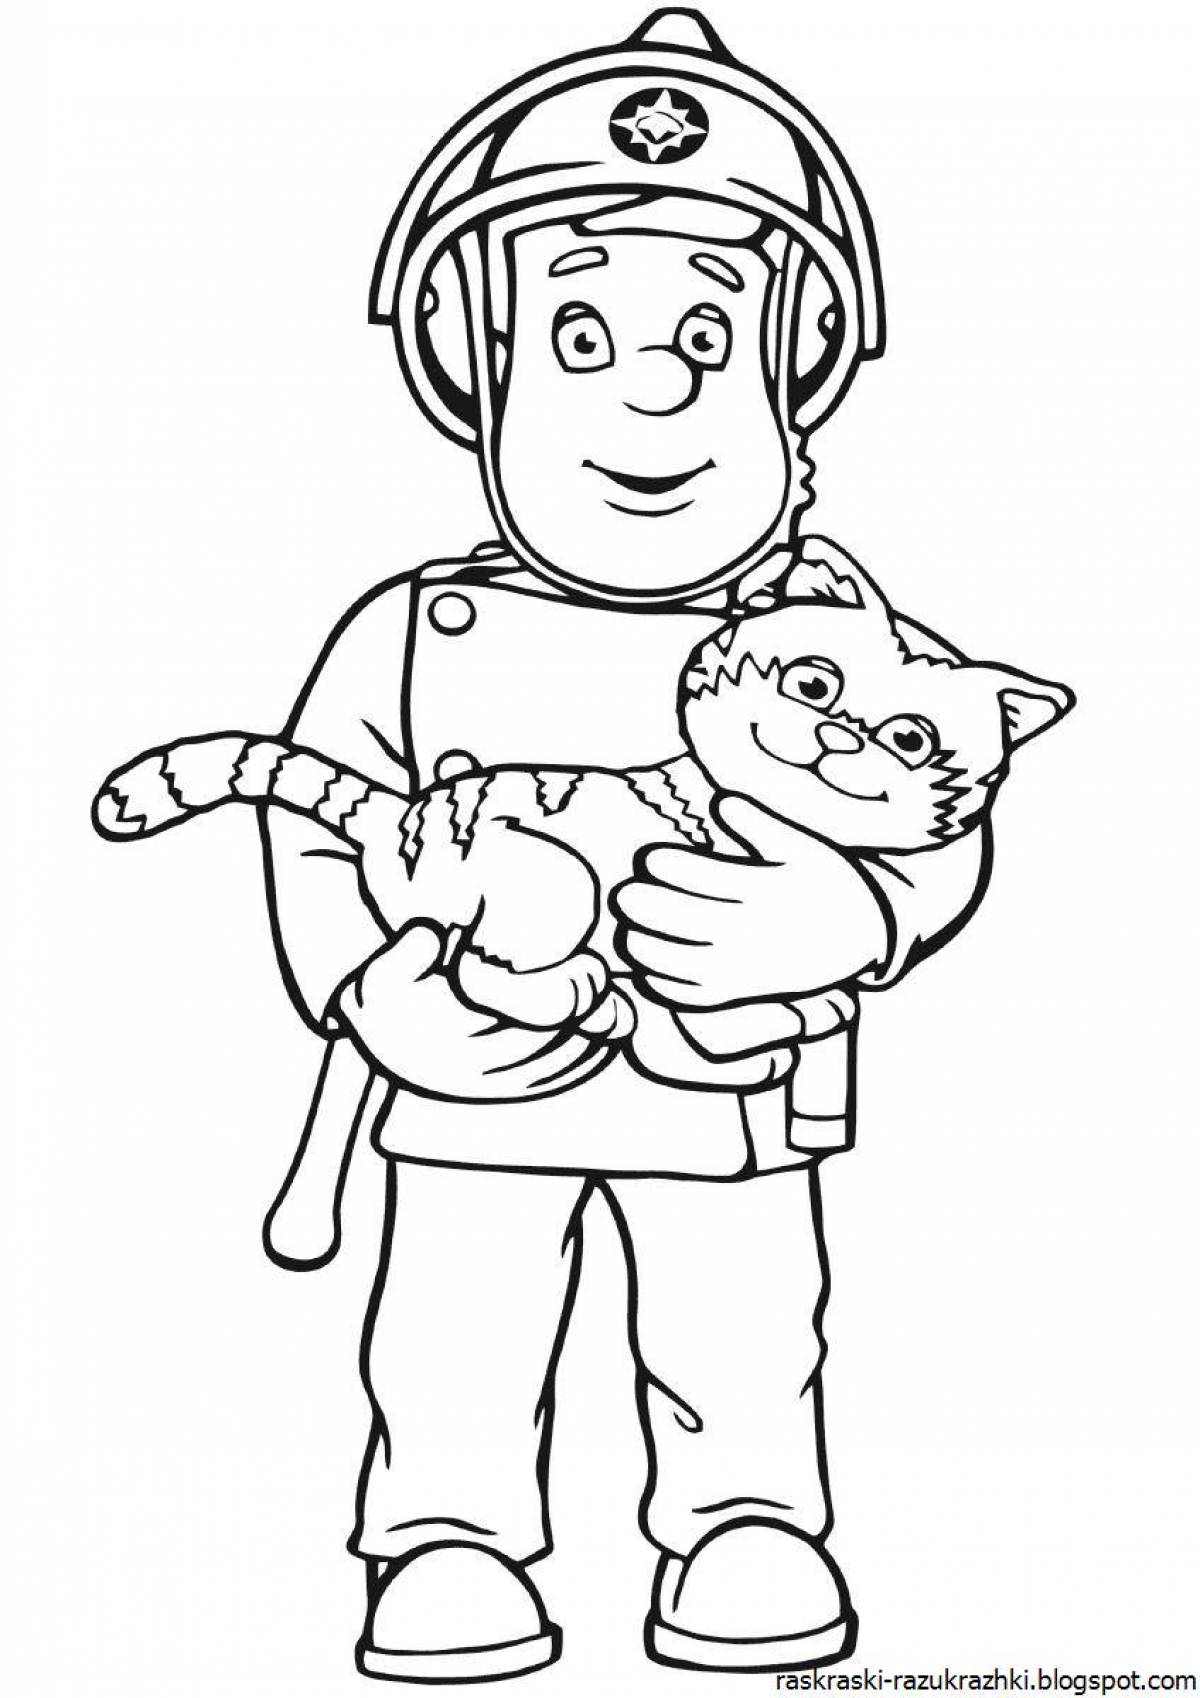 Glorious fireman coloring pages for kids